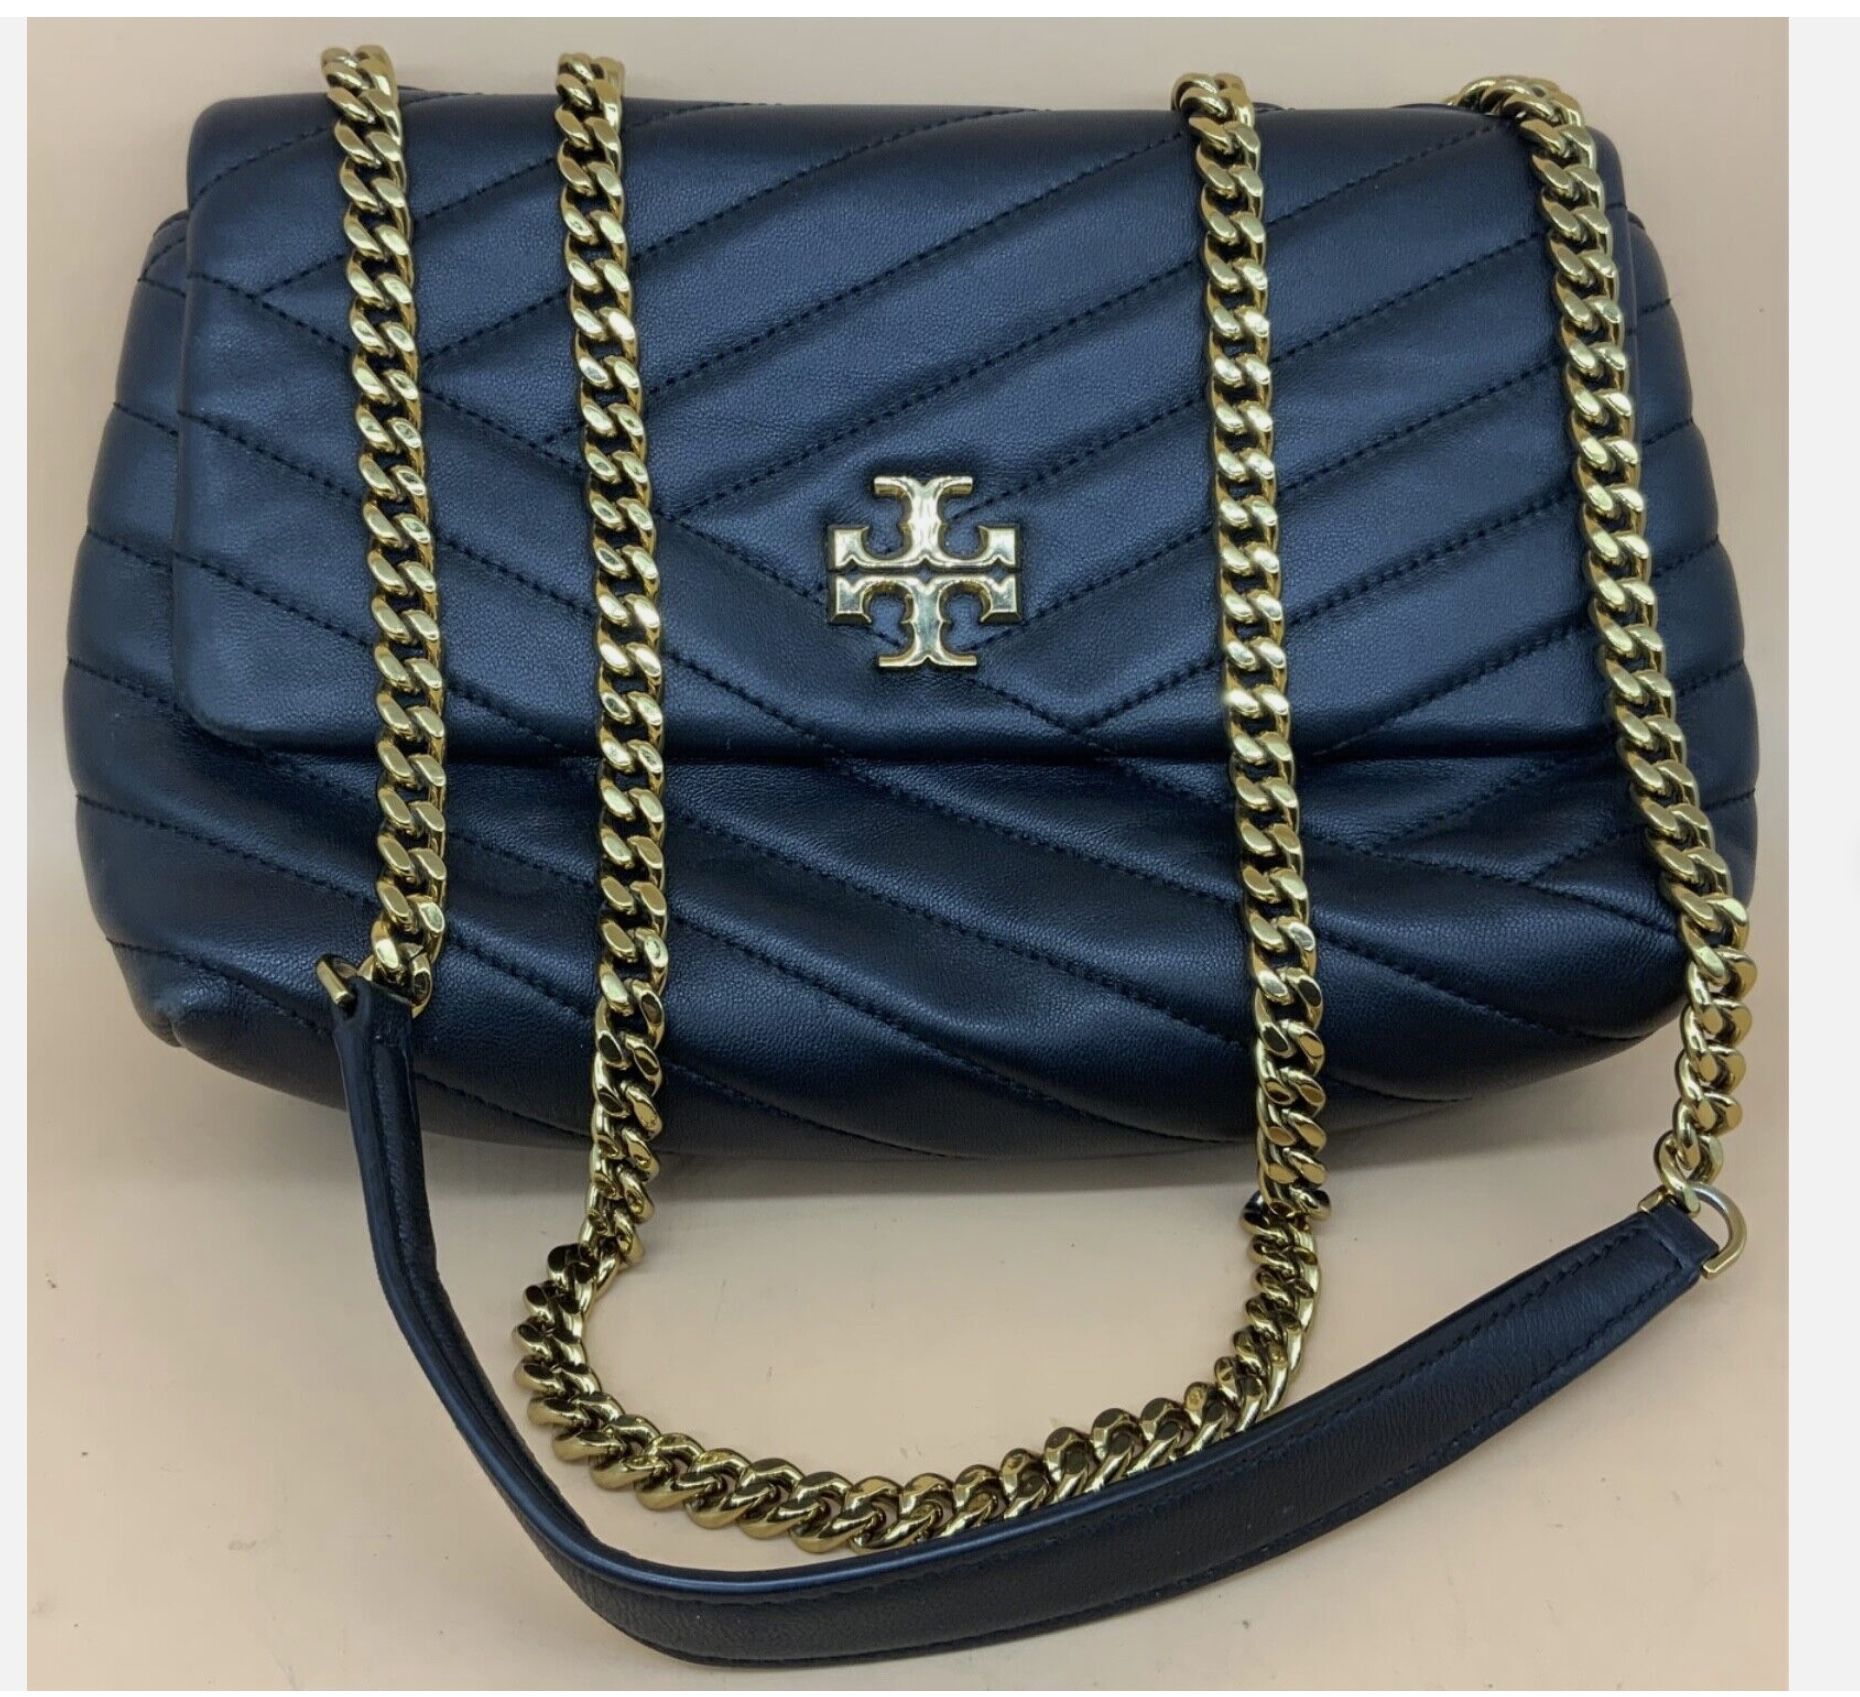 Tory Burch Kira Chevron Convertible Fashion Quilted Small Leather Shoulder Bag